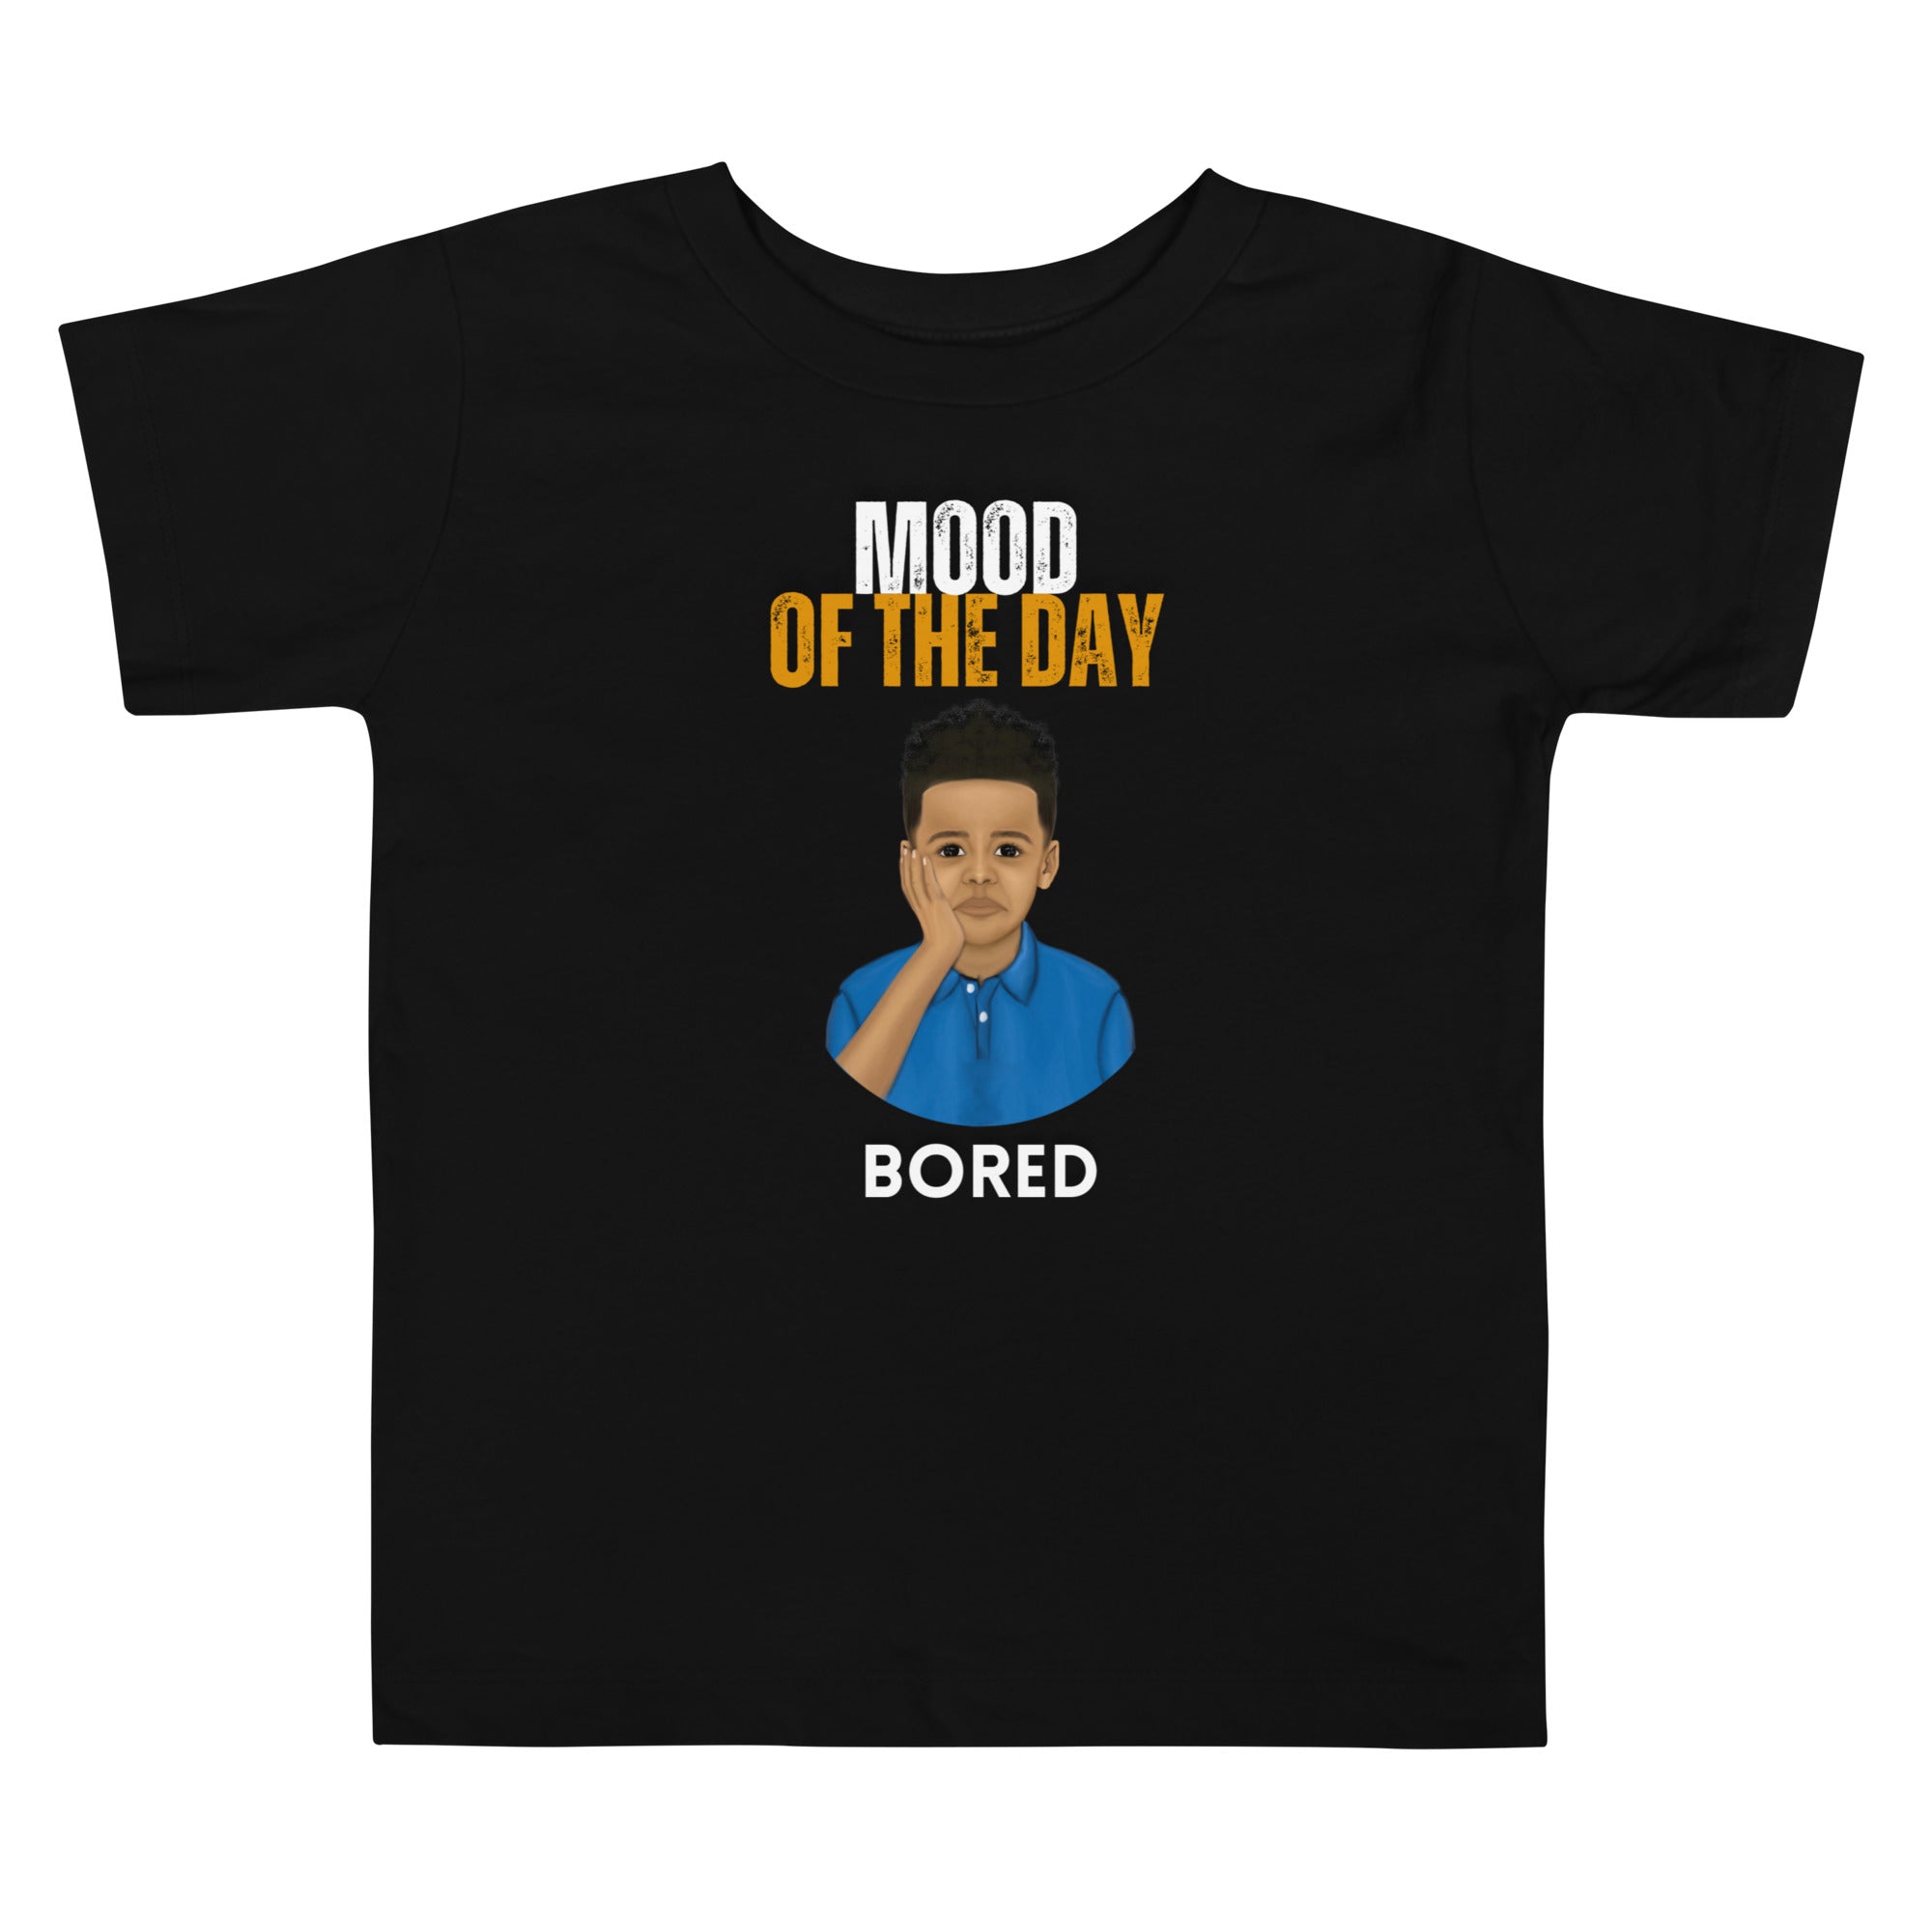 Toddler Mood of the Day T-shirt - Bored